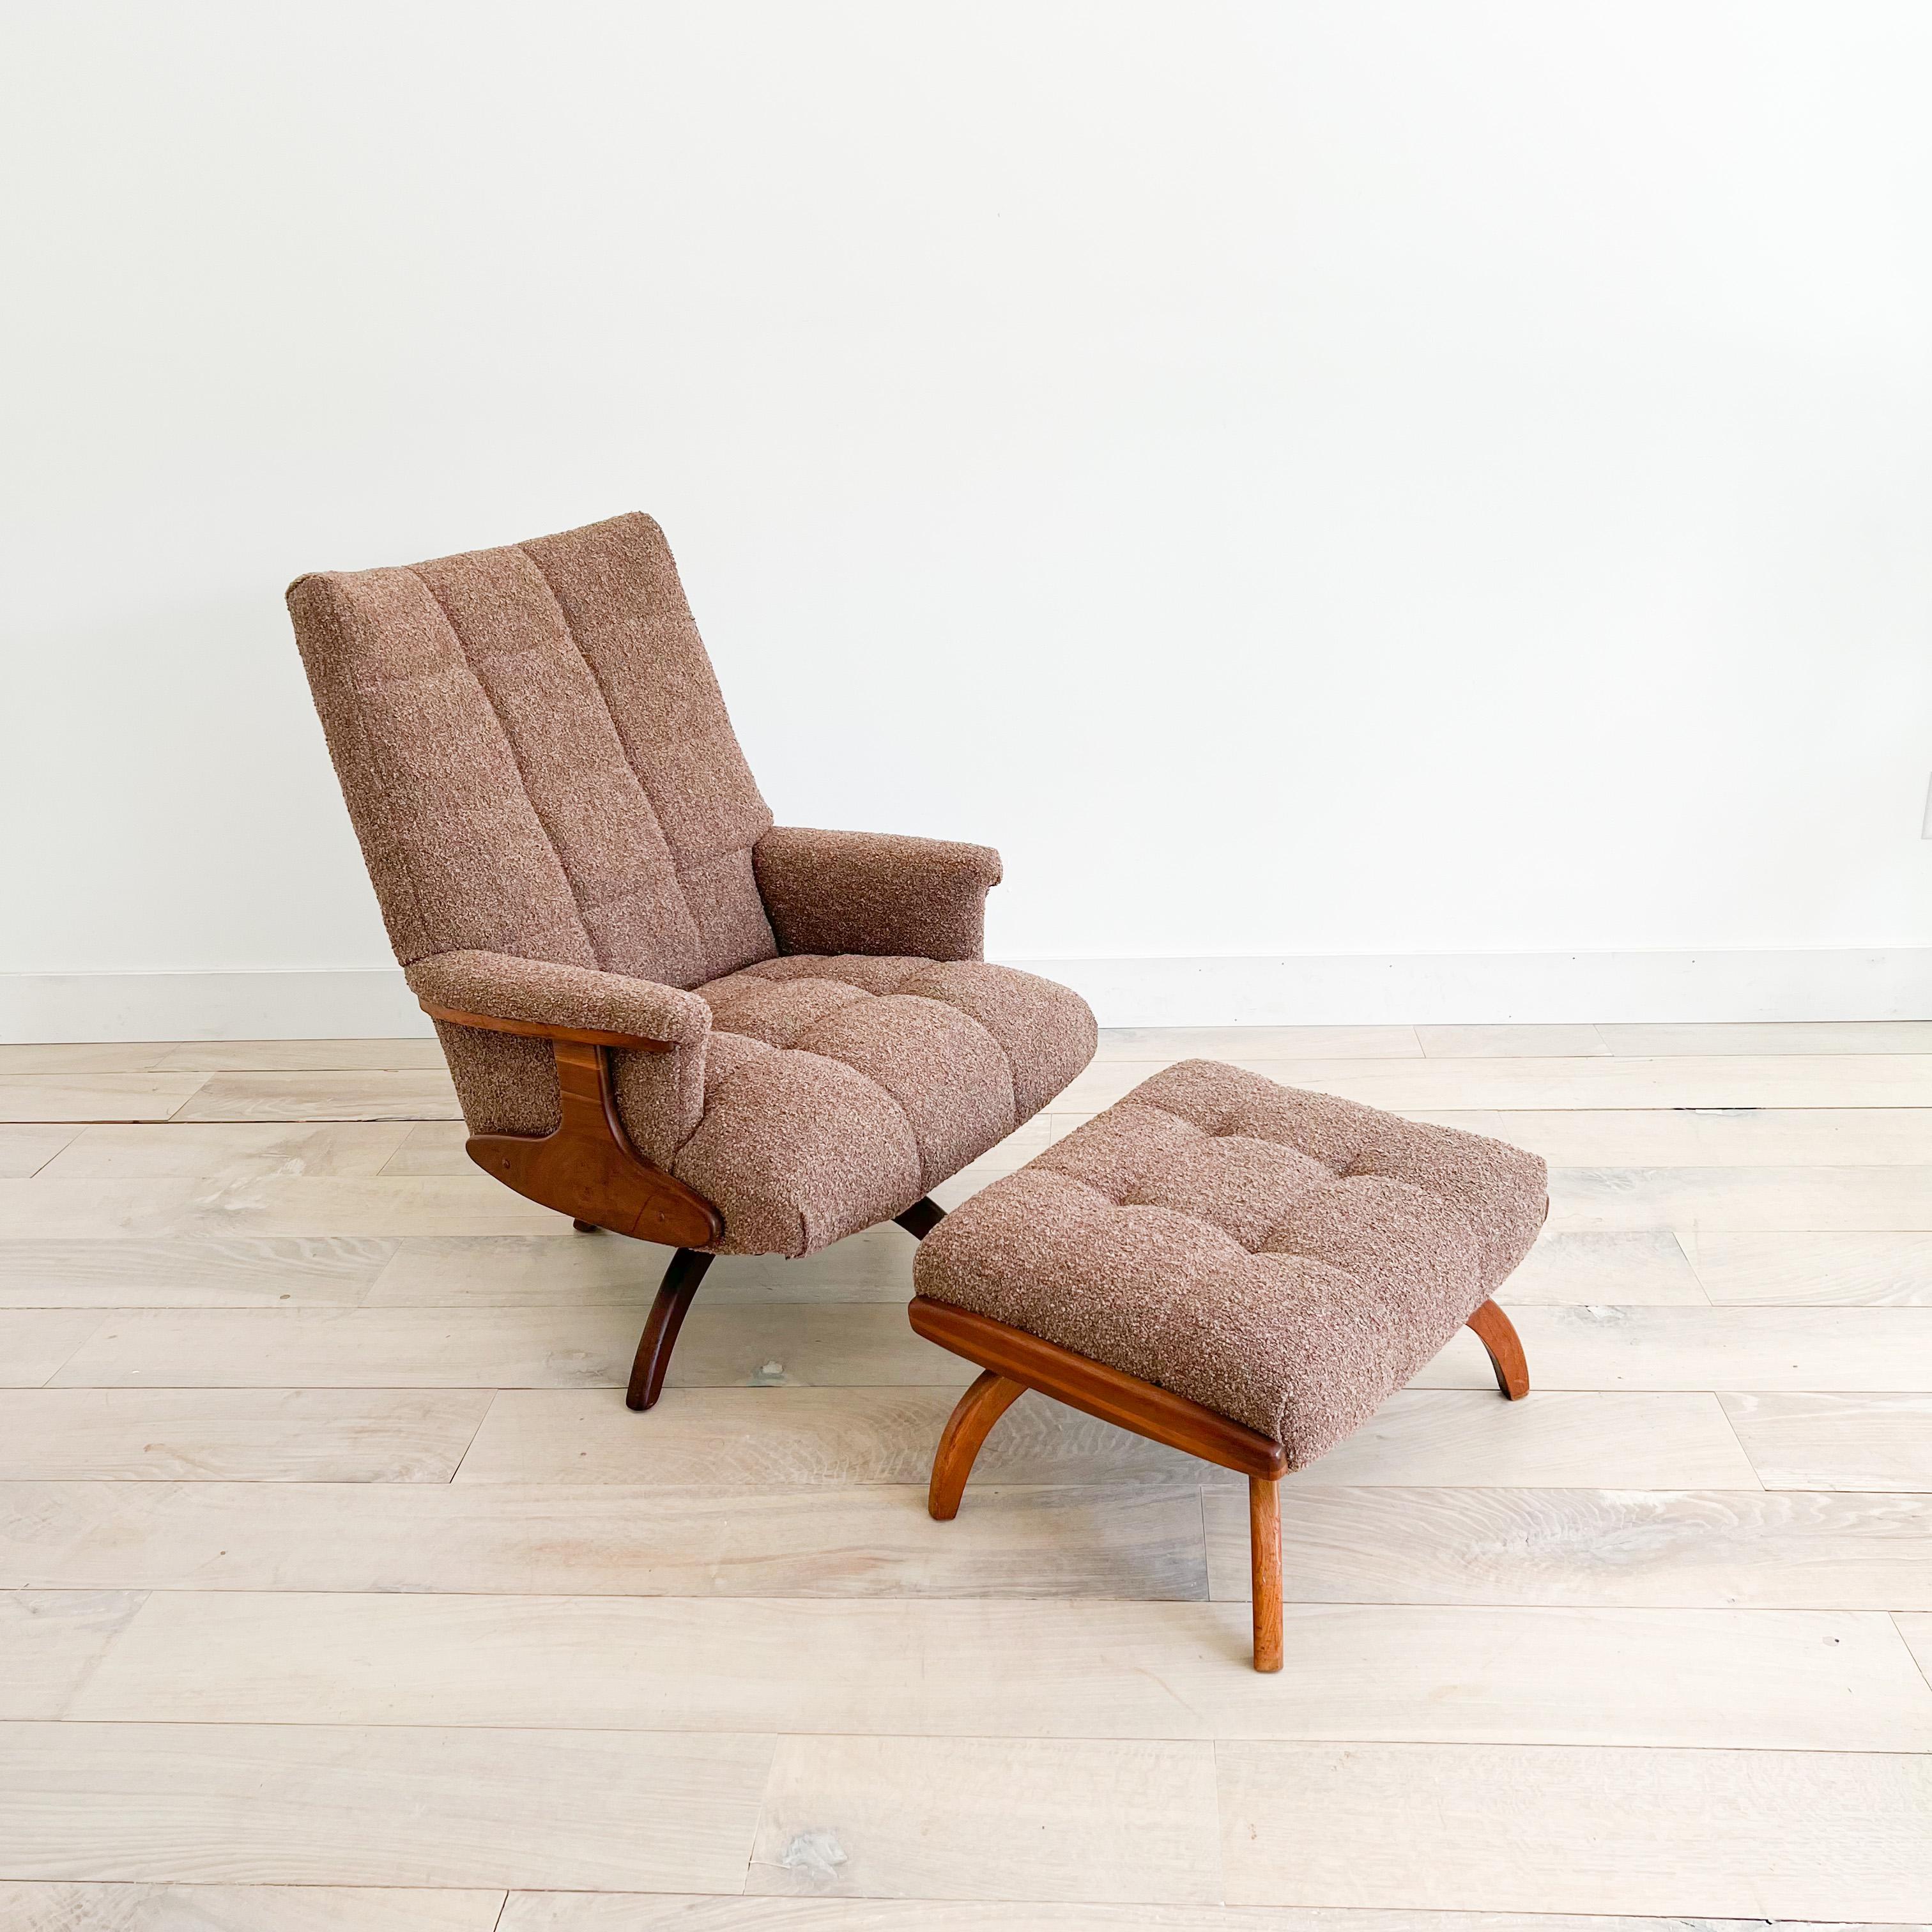 Mid-Century Modern swivel lounge chair and ottoman with sculpted wooden bases. New tufted soft nubby mauve/brown upholstery. Some scuffing/scratching to the legs/wooden sides.

26”x26” 17”SH 40.5”H

ottoman - 24.5”x20” 14.5”H.